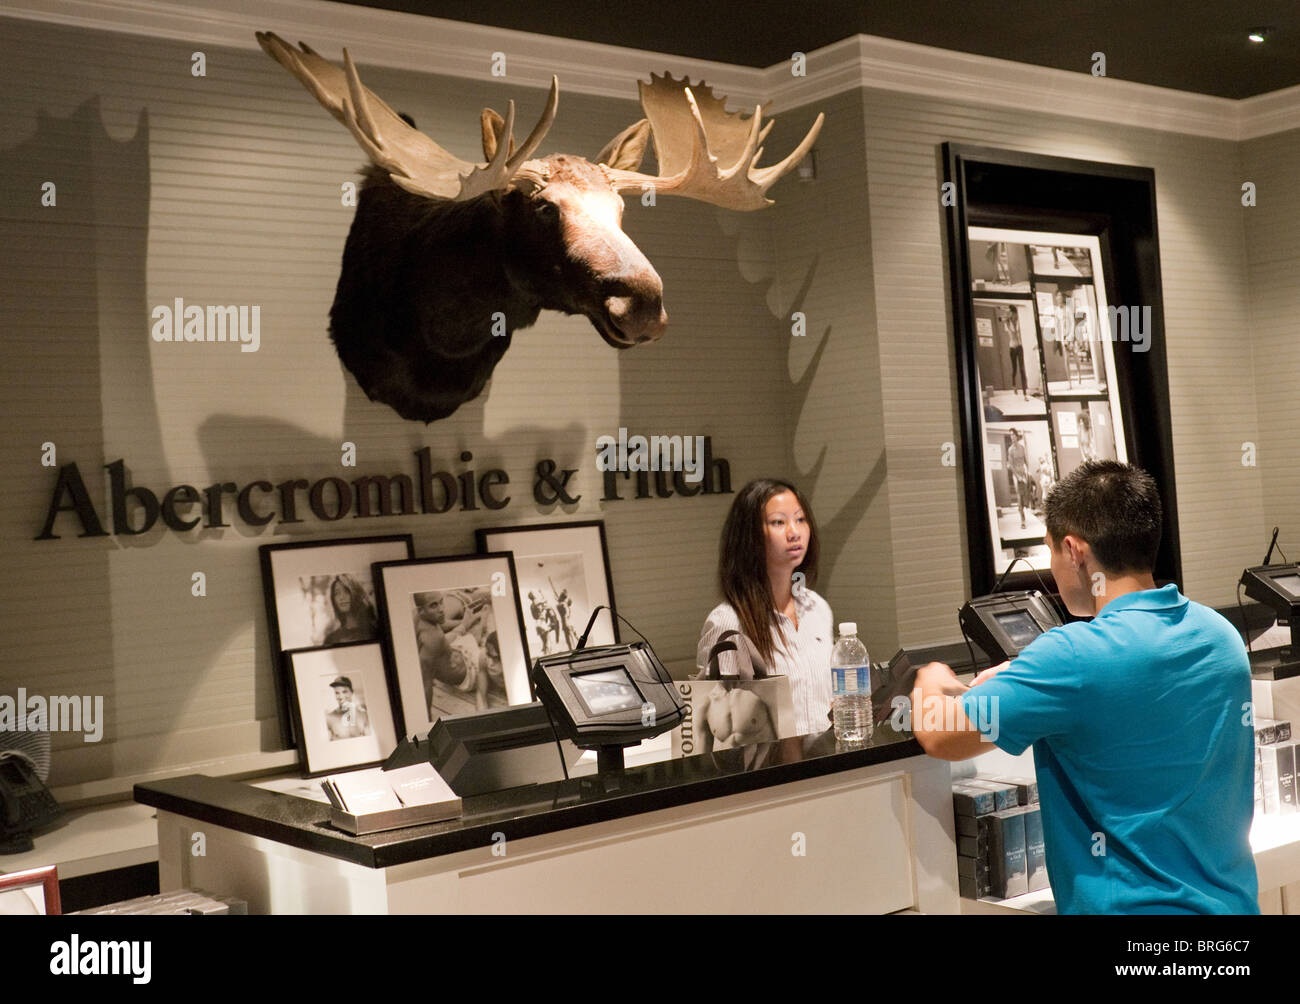 abercrombie and fitch moose